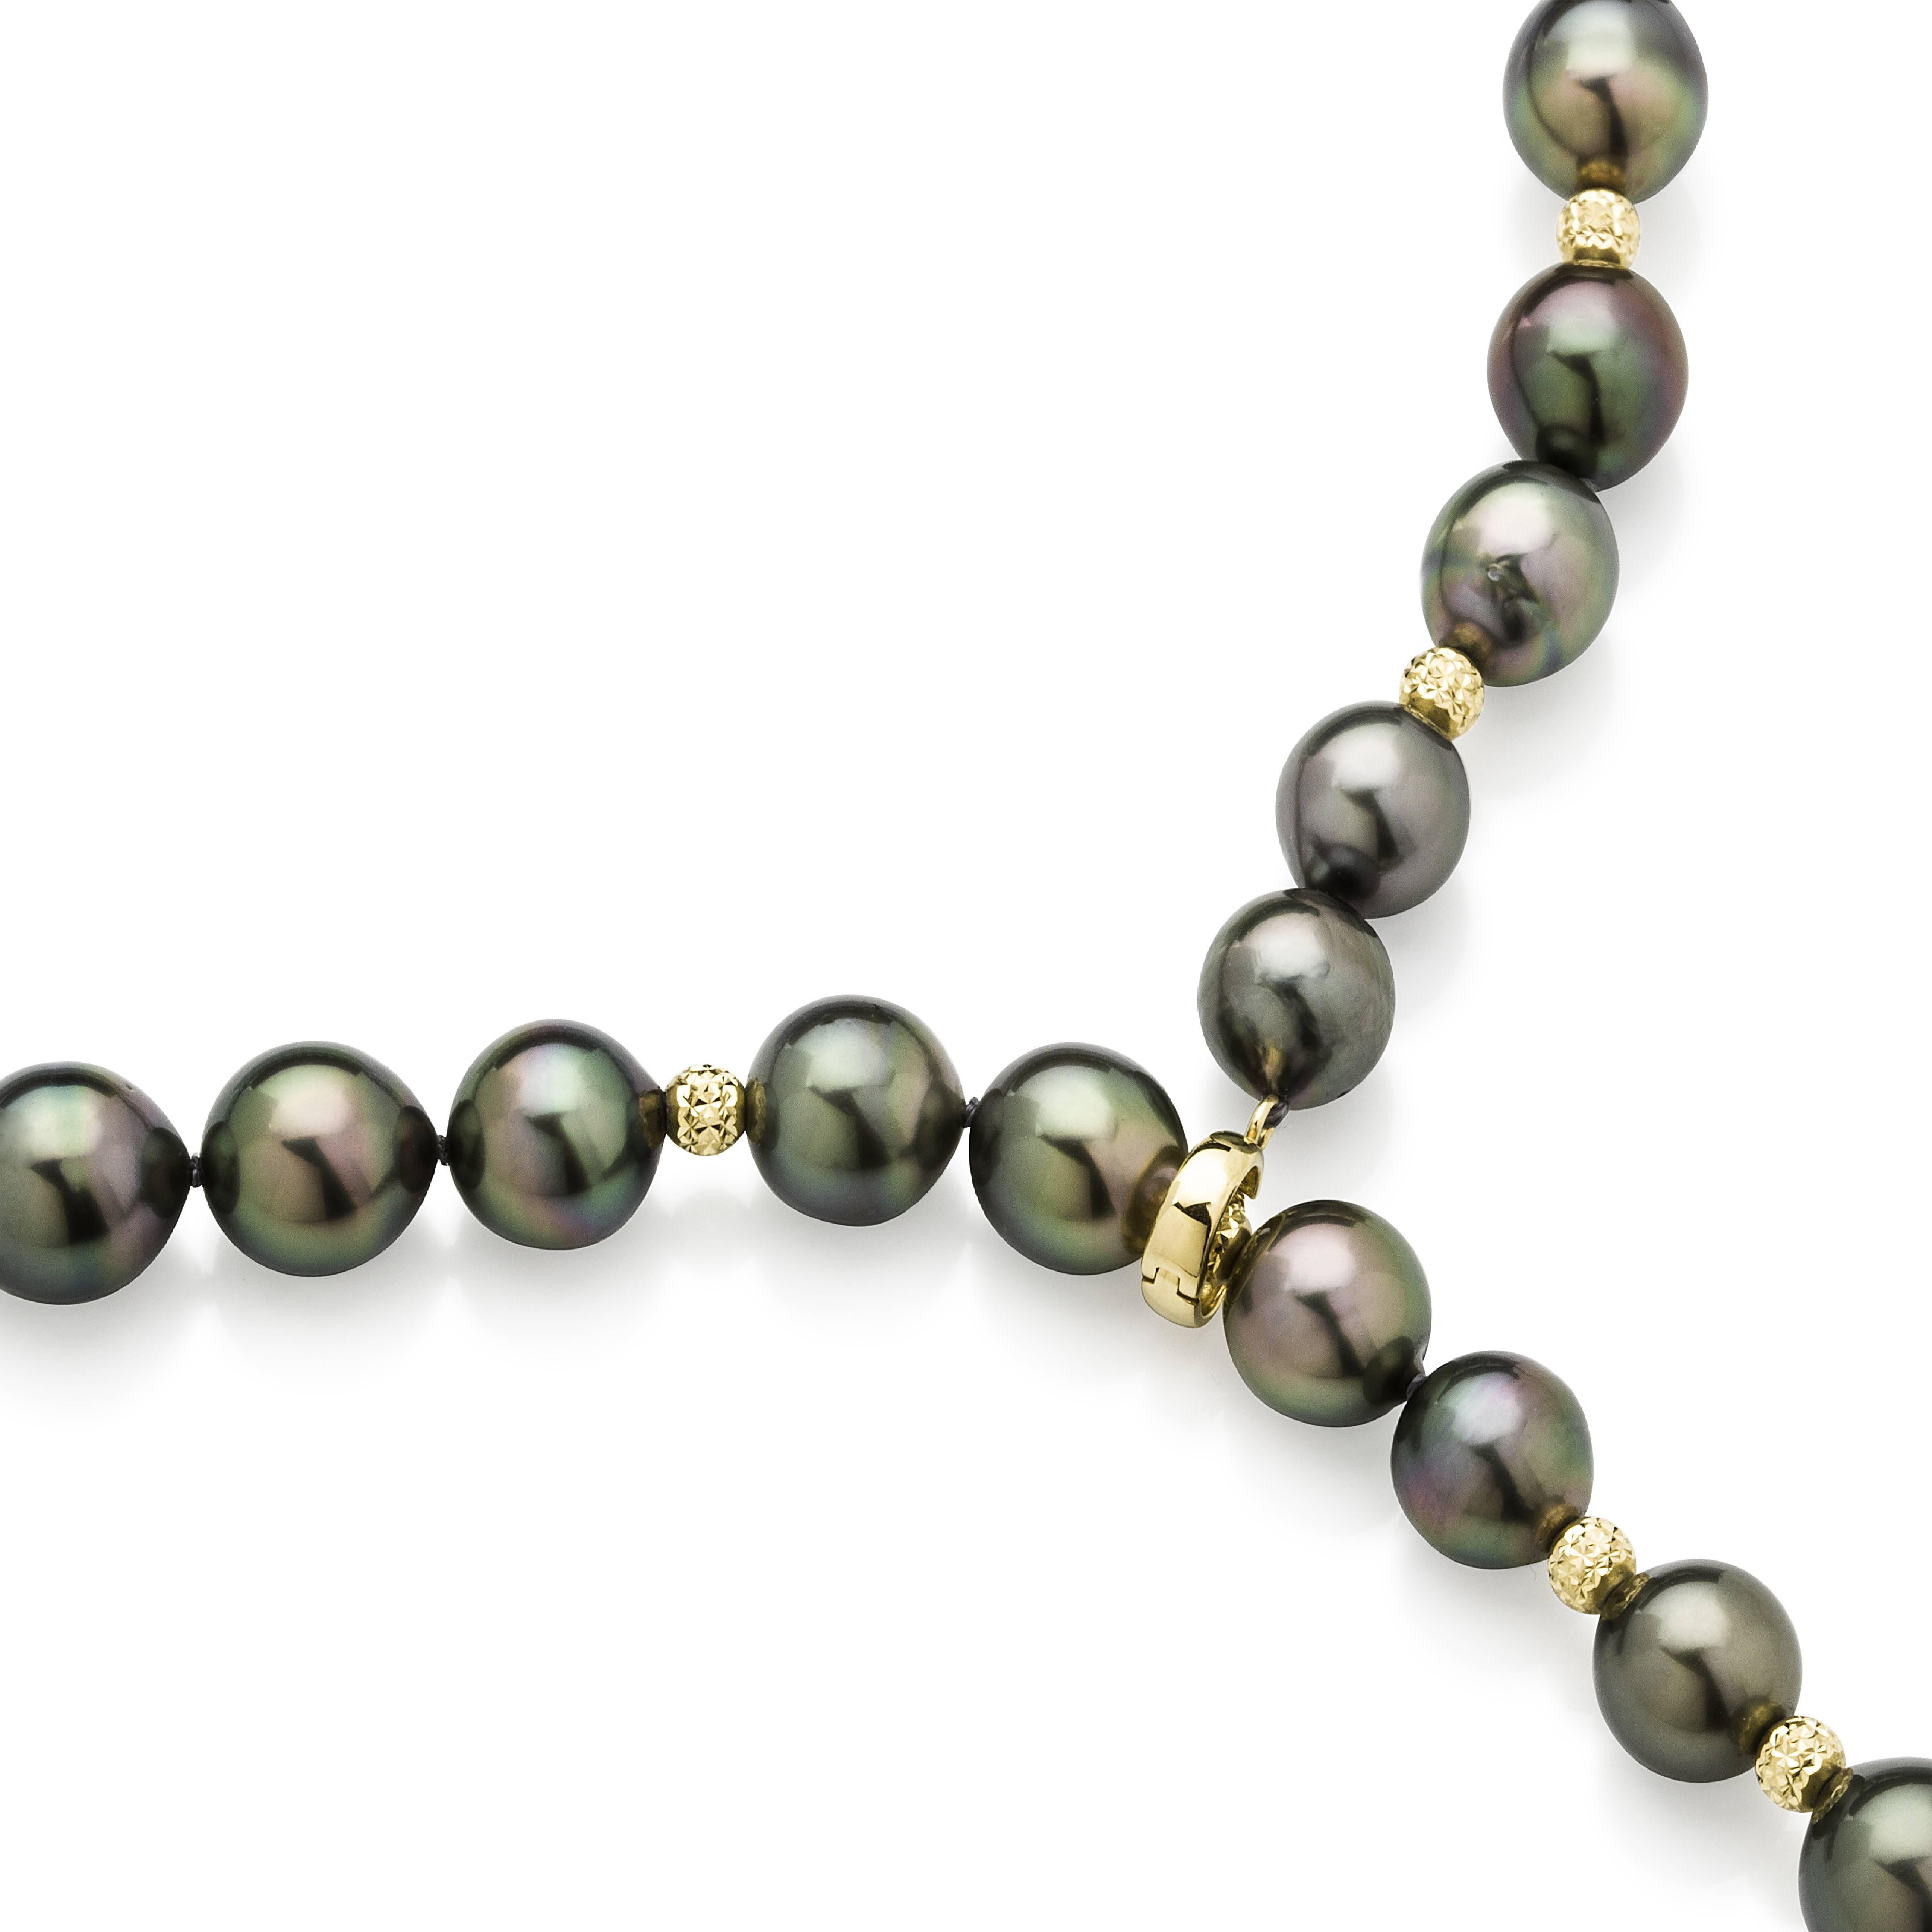 Versatile strand of Tahitian South Sea pearls....

This strand of 44 pearls from 0.35 - 0.45 inches / 9 mm - 11.6 mm is complimented with 7 x 18 carat yellow gold beads as a feature and an 18 carat yellow gold latch clasp.
             
The pearls